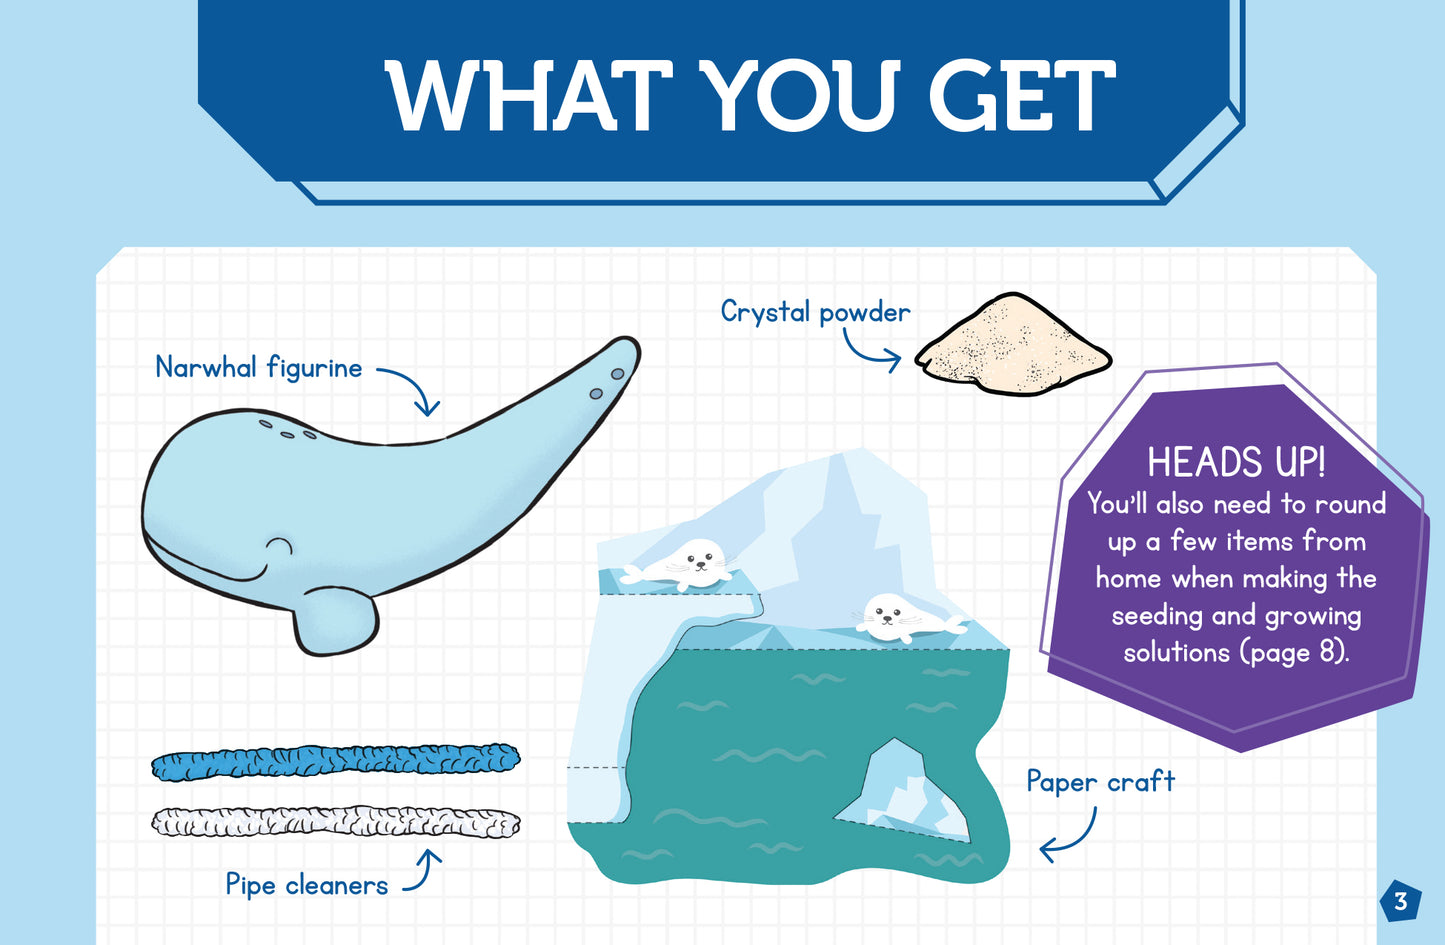 Grow Your Own Crystal Narwhal